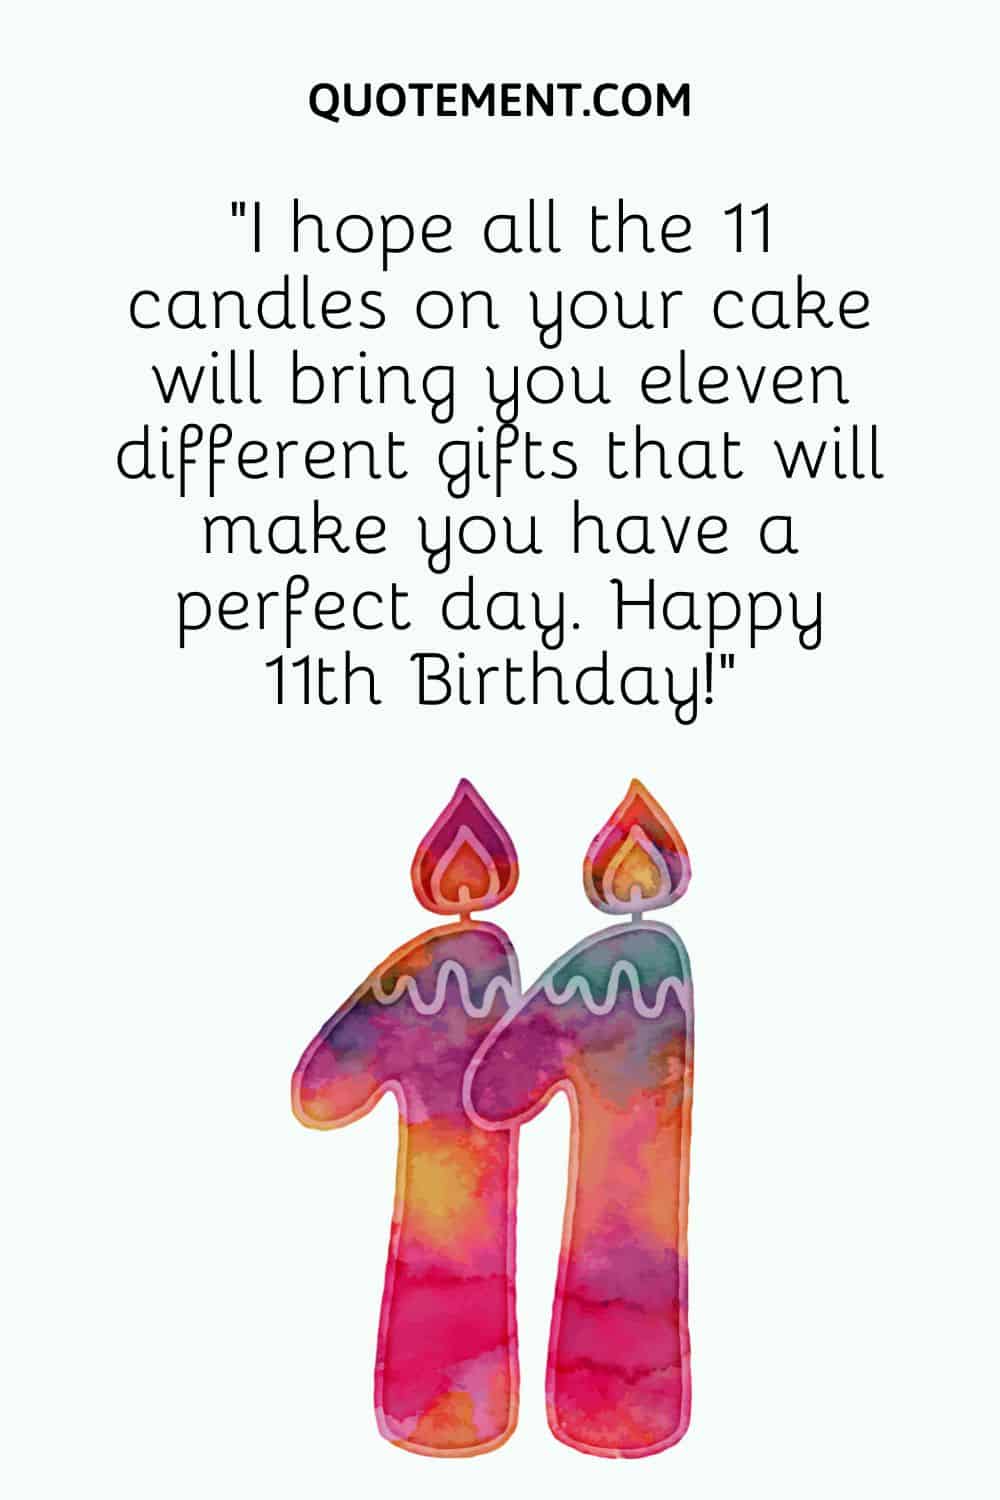 “I hope all the 11 candles on your cake will bring you eleven different gifts that will make you have a perfect day. Happy 11th Birthday!”